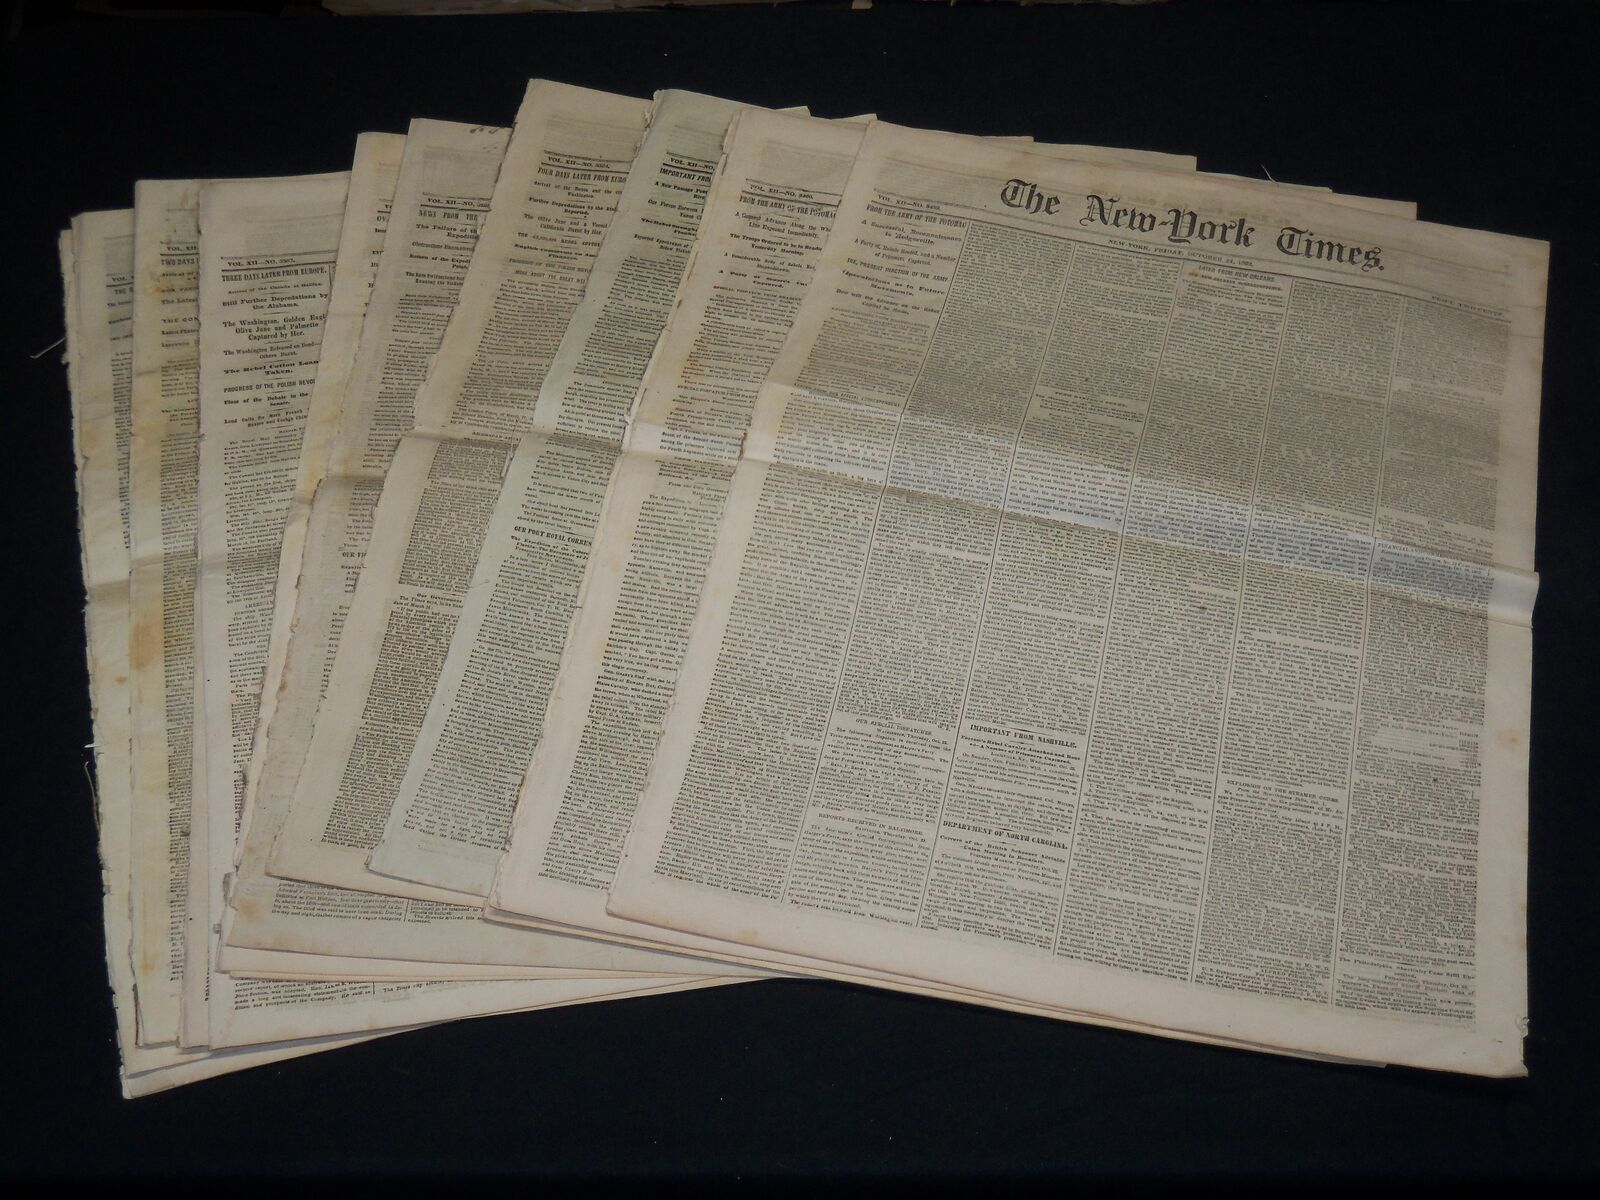 1862-1863 NEW YORK TIMES NEWSPAPER LOT OF 12 - CIVIL WAR COVERAGE - NP 4967